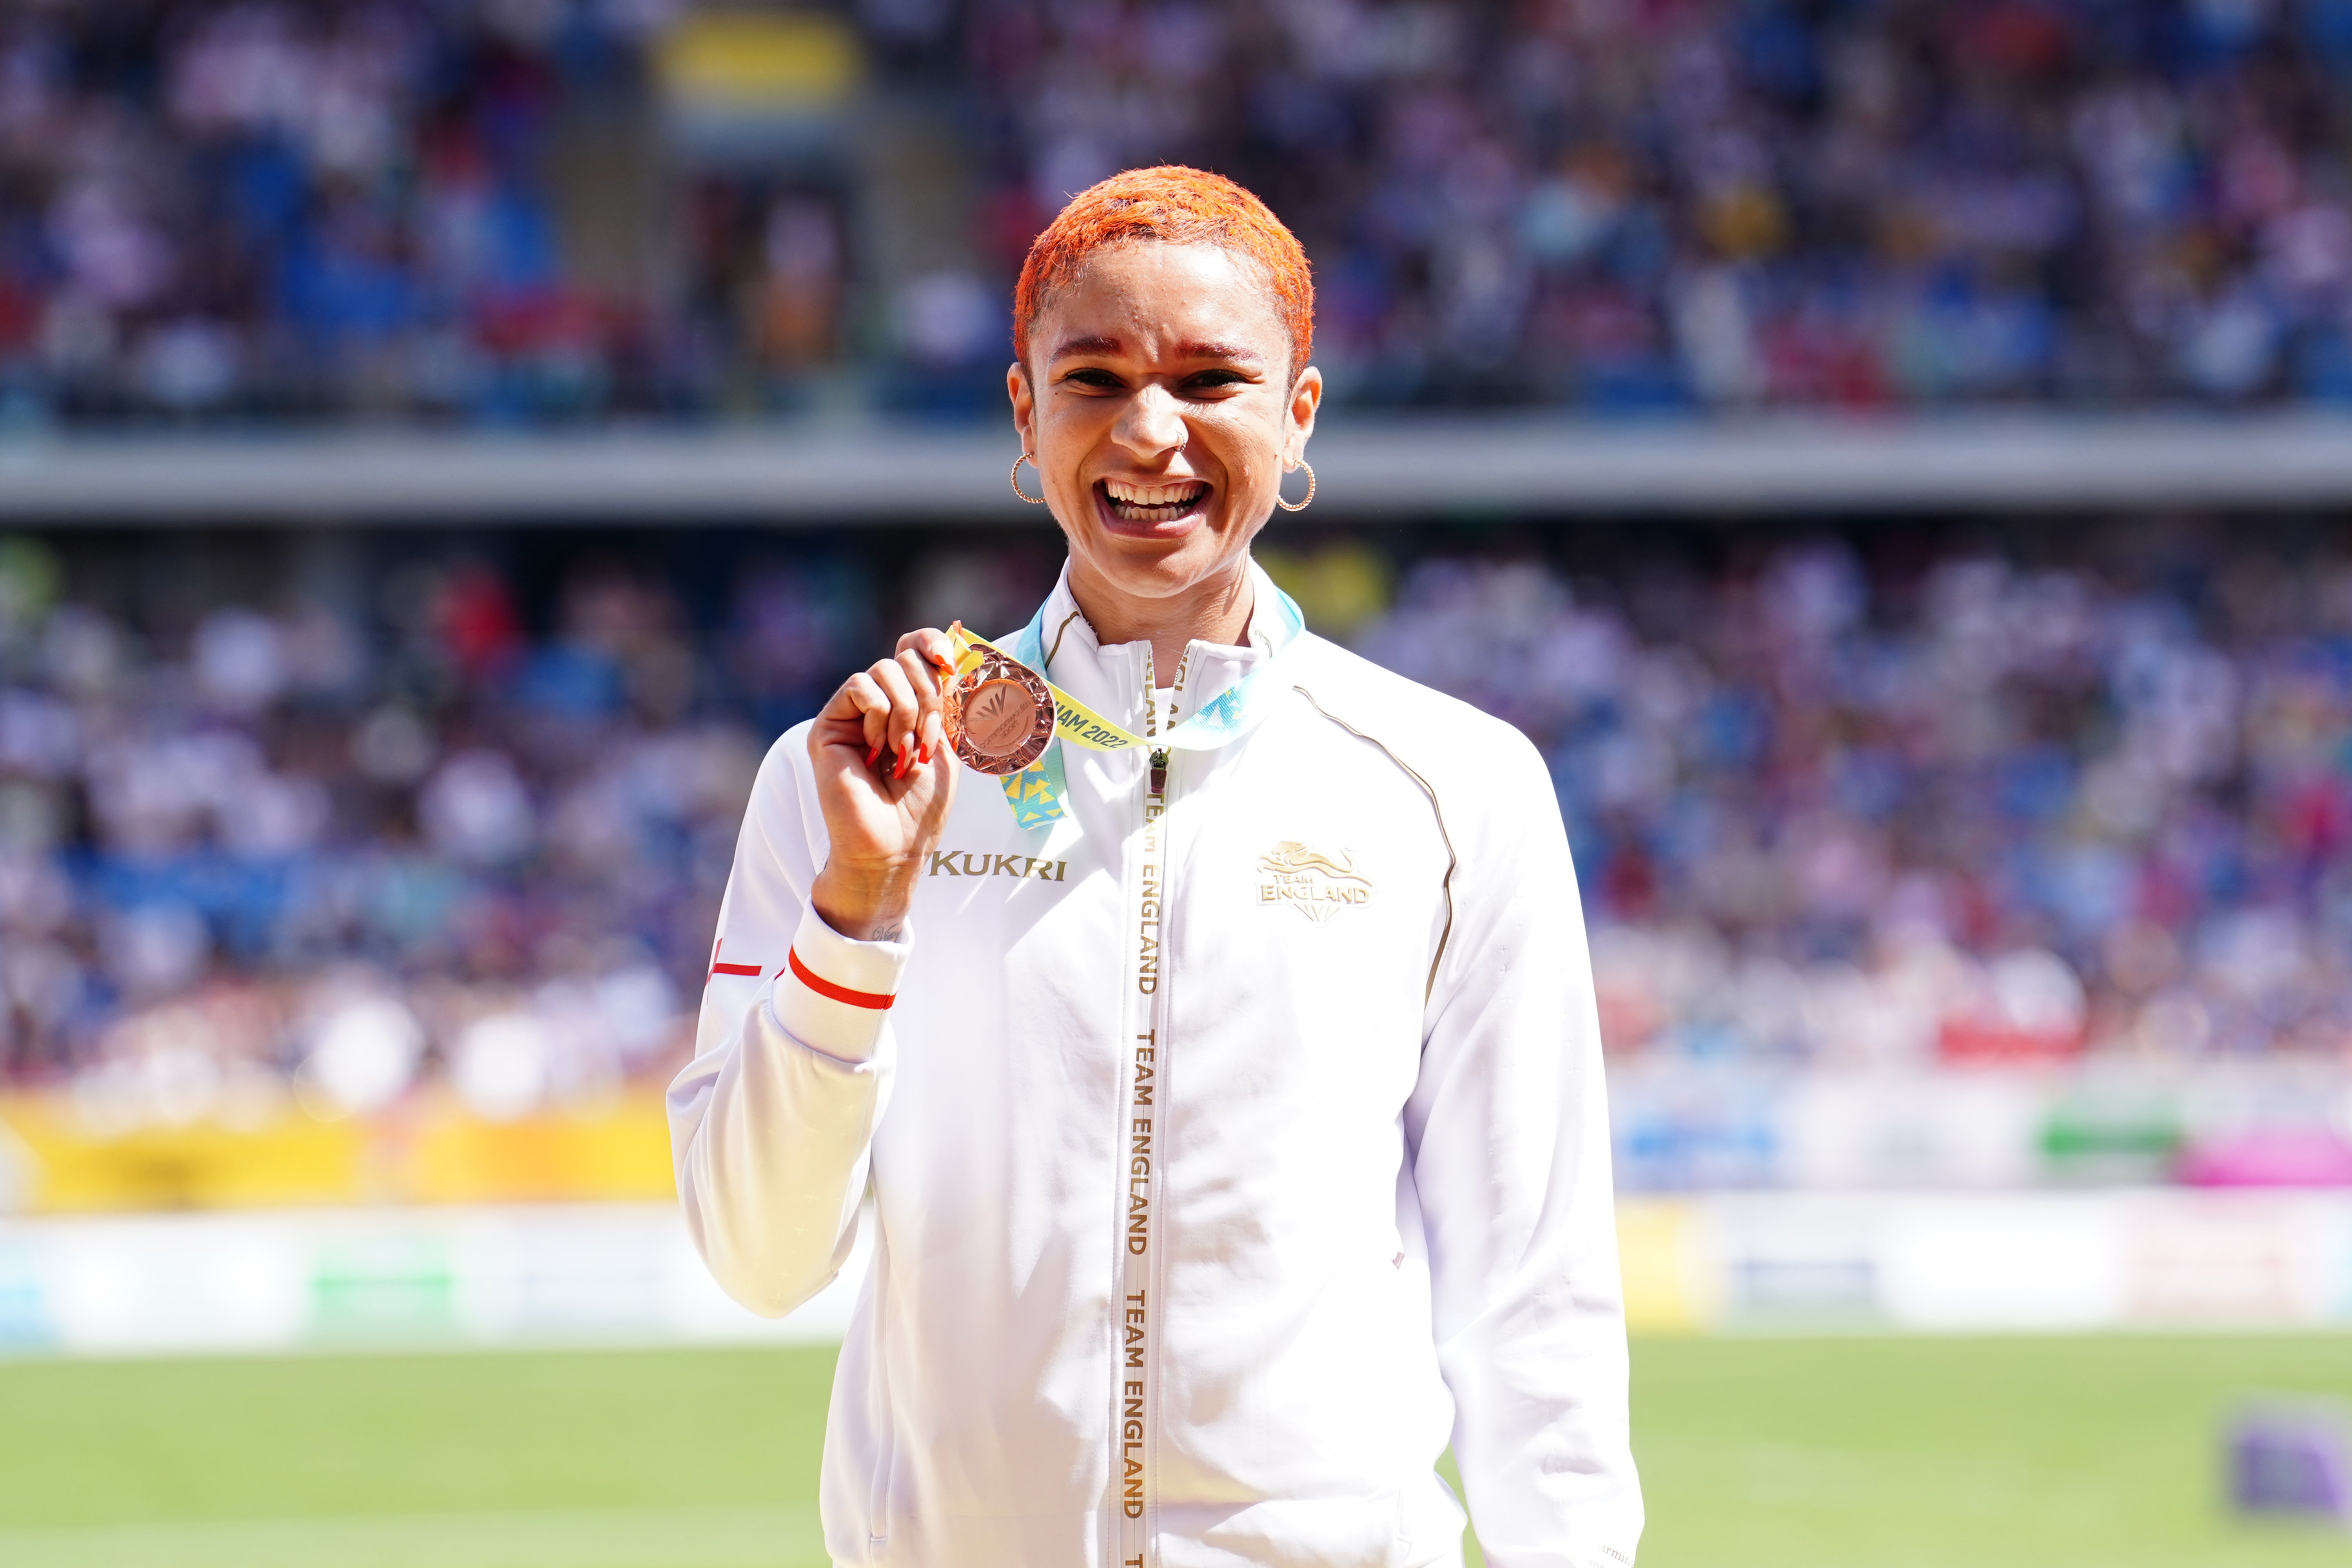 Jodie Williams with a bronze medal during the medal ceremony for the Women’s 400m Final at the 2022 Commonwealth Games in Birmingham (Martin Rickett/PA)